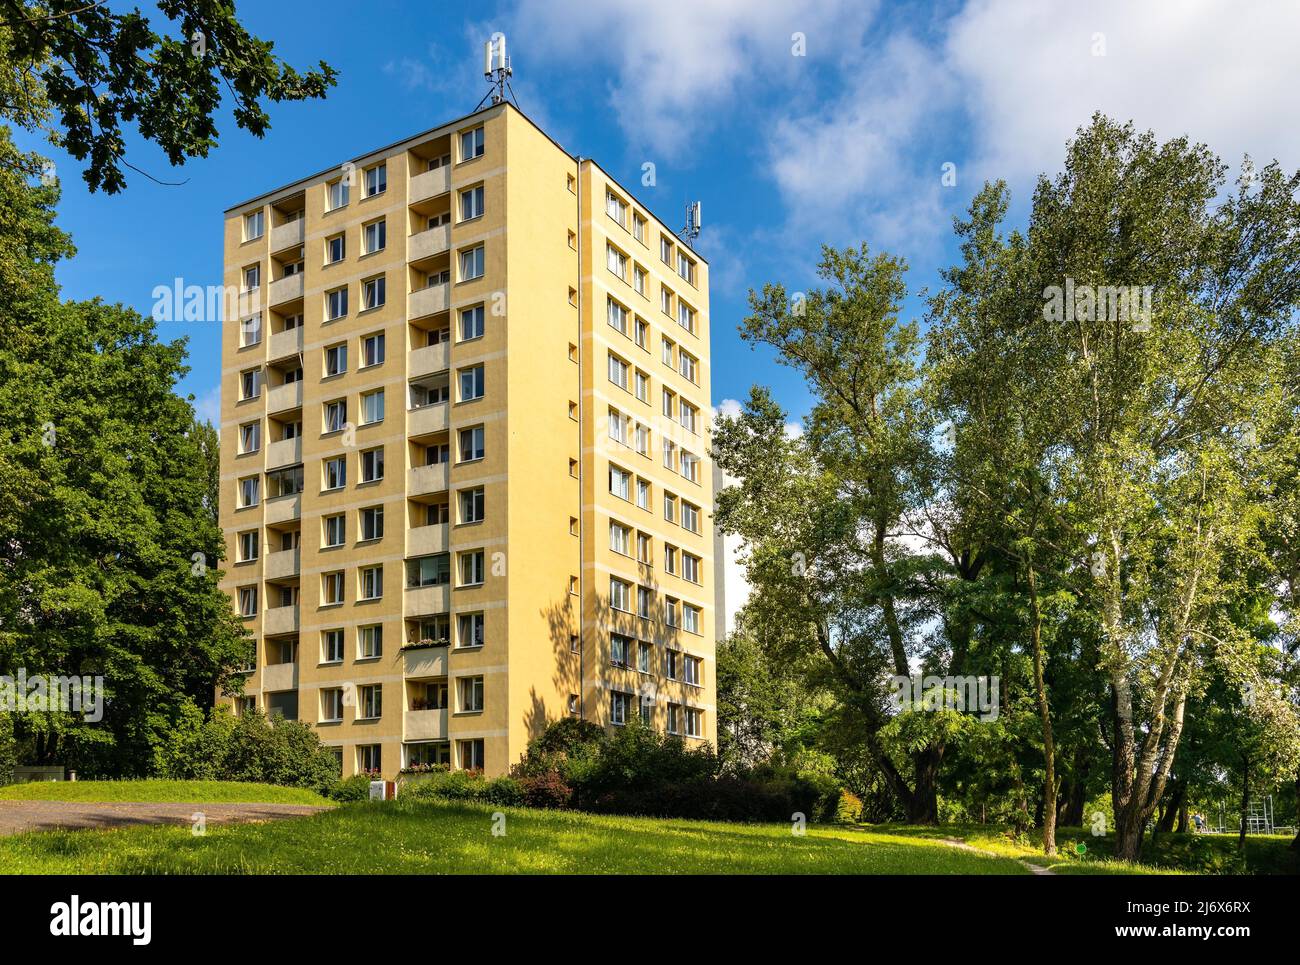 Warsaw, Poland - July 11, 2021: Large scale project residential tower at 1 Dworkowa street above Morskie Oko pond park in Mokotow district of Warsaw Stock Photo